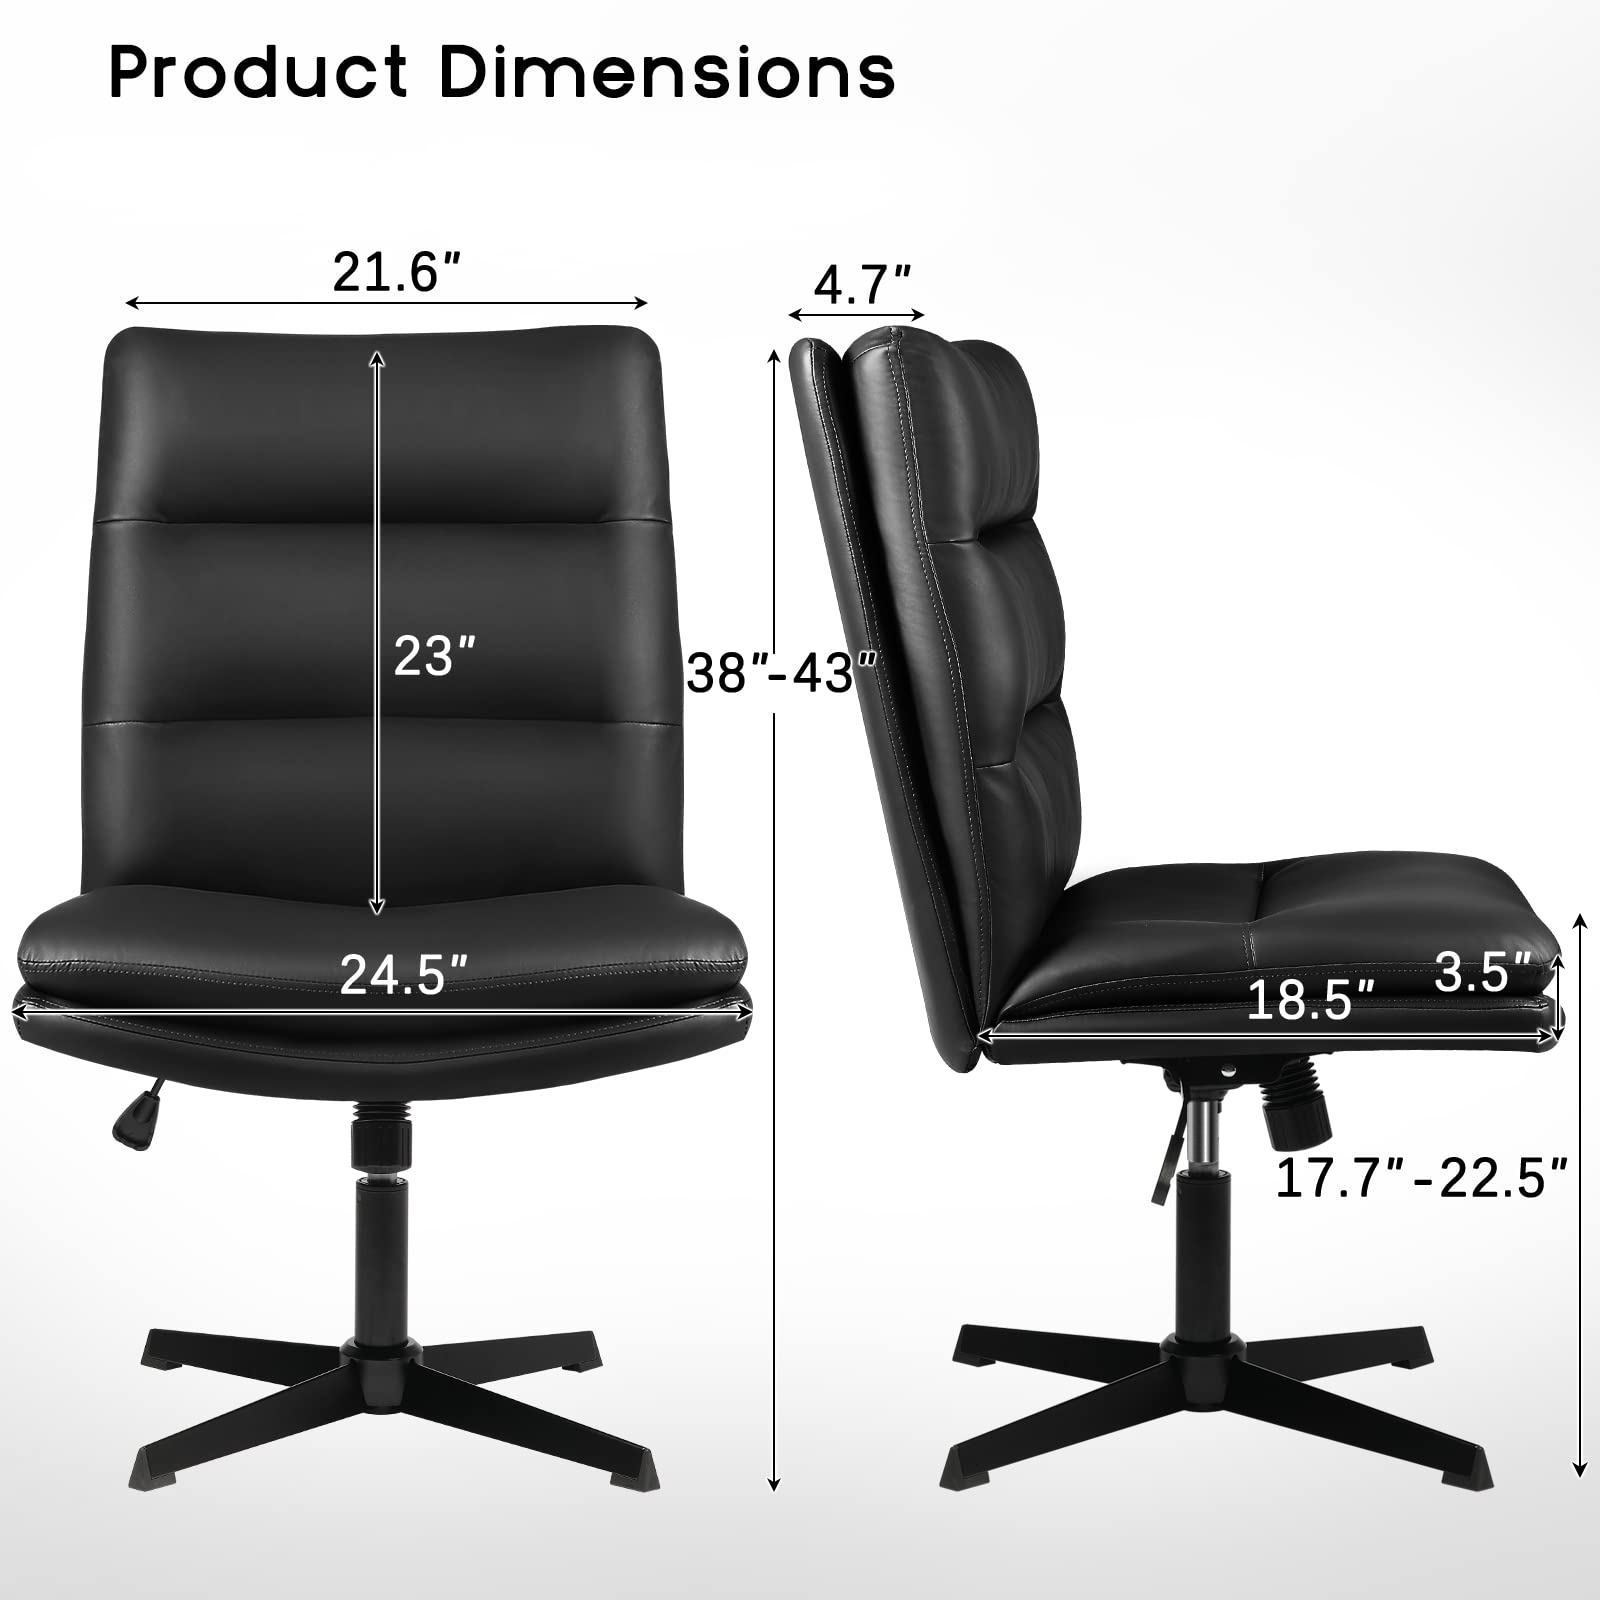 PUKAMI Criss Cross Legged Office Chair,Pu Leather Armless Office Desk Chair No Wheels,Modern Swivel Height Adjustable Wide Seat High Back Computer Task Vanity Chair for Home Office (Black)